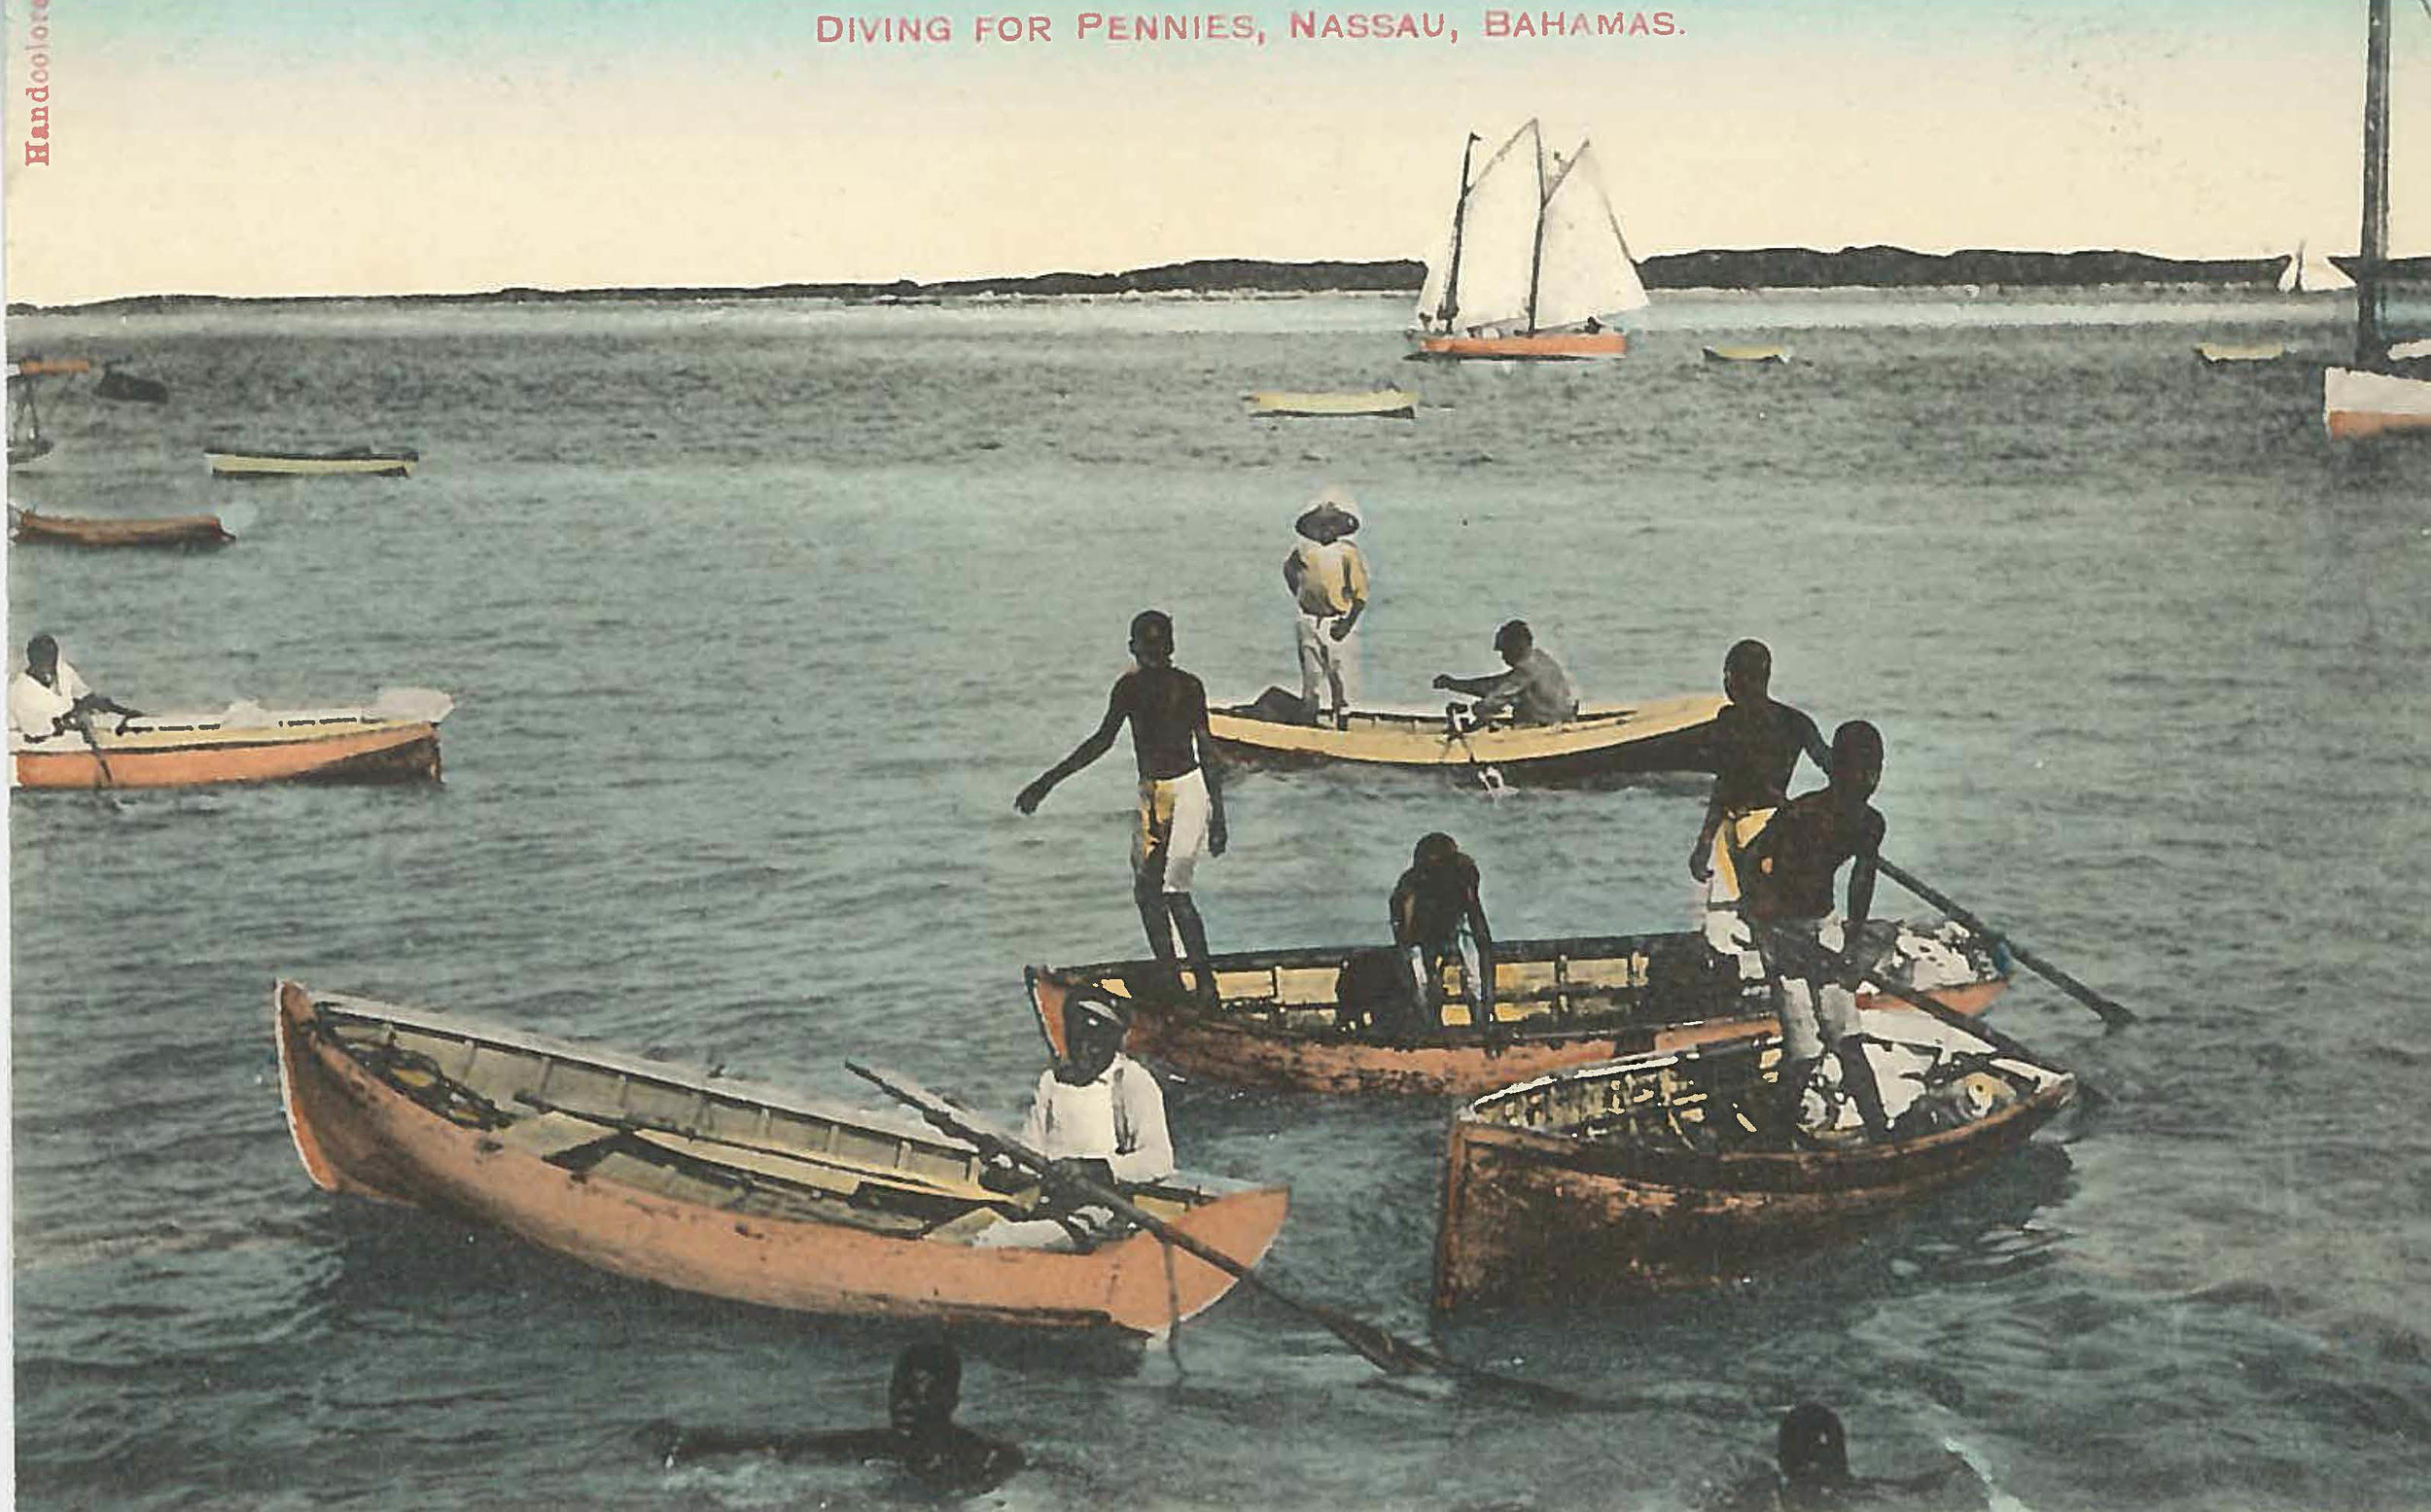 Diving for Pennies’ (estimated c.1870-1930), hand painted colonial era postcard. Photographer unknown. Images courtesy of the NAGB.